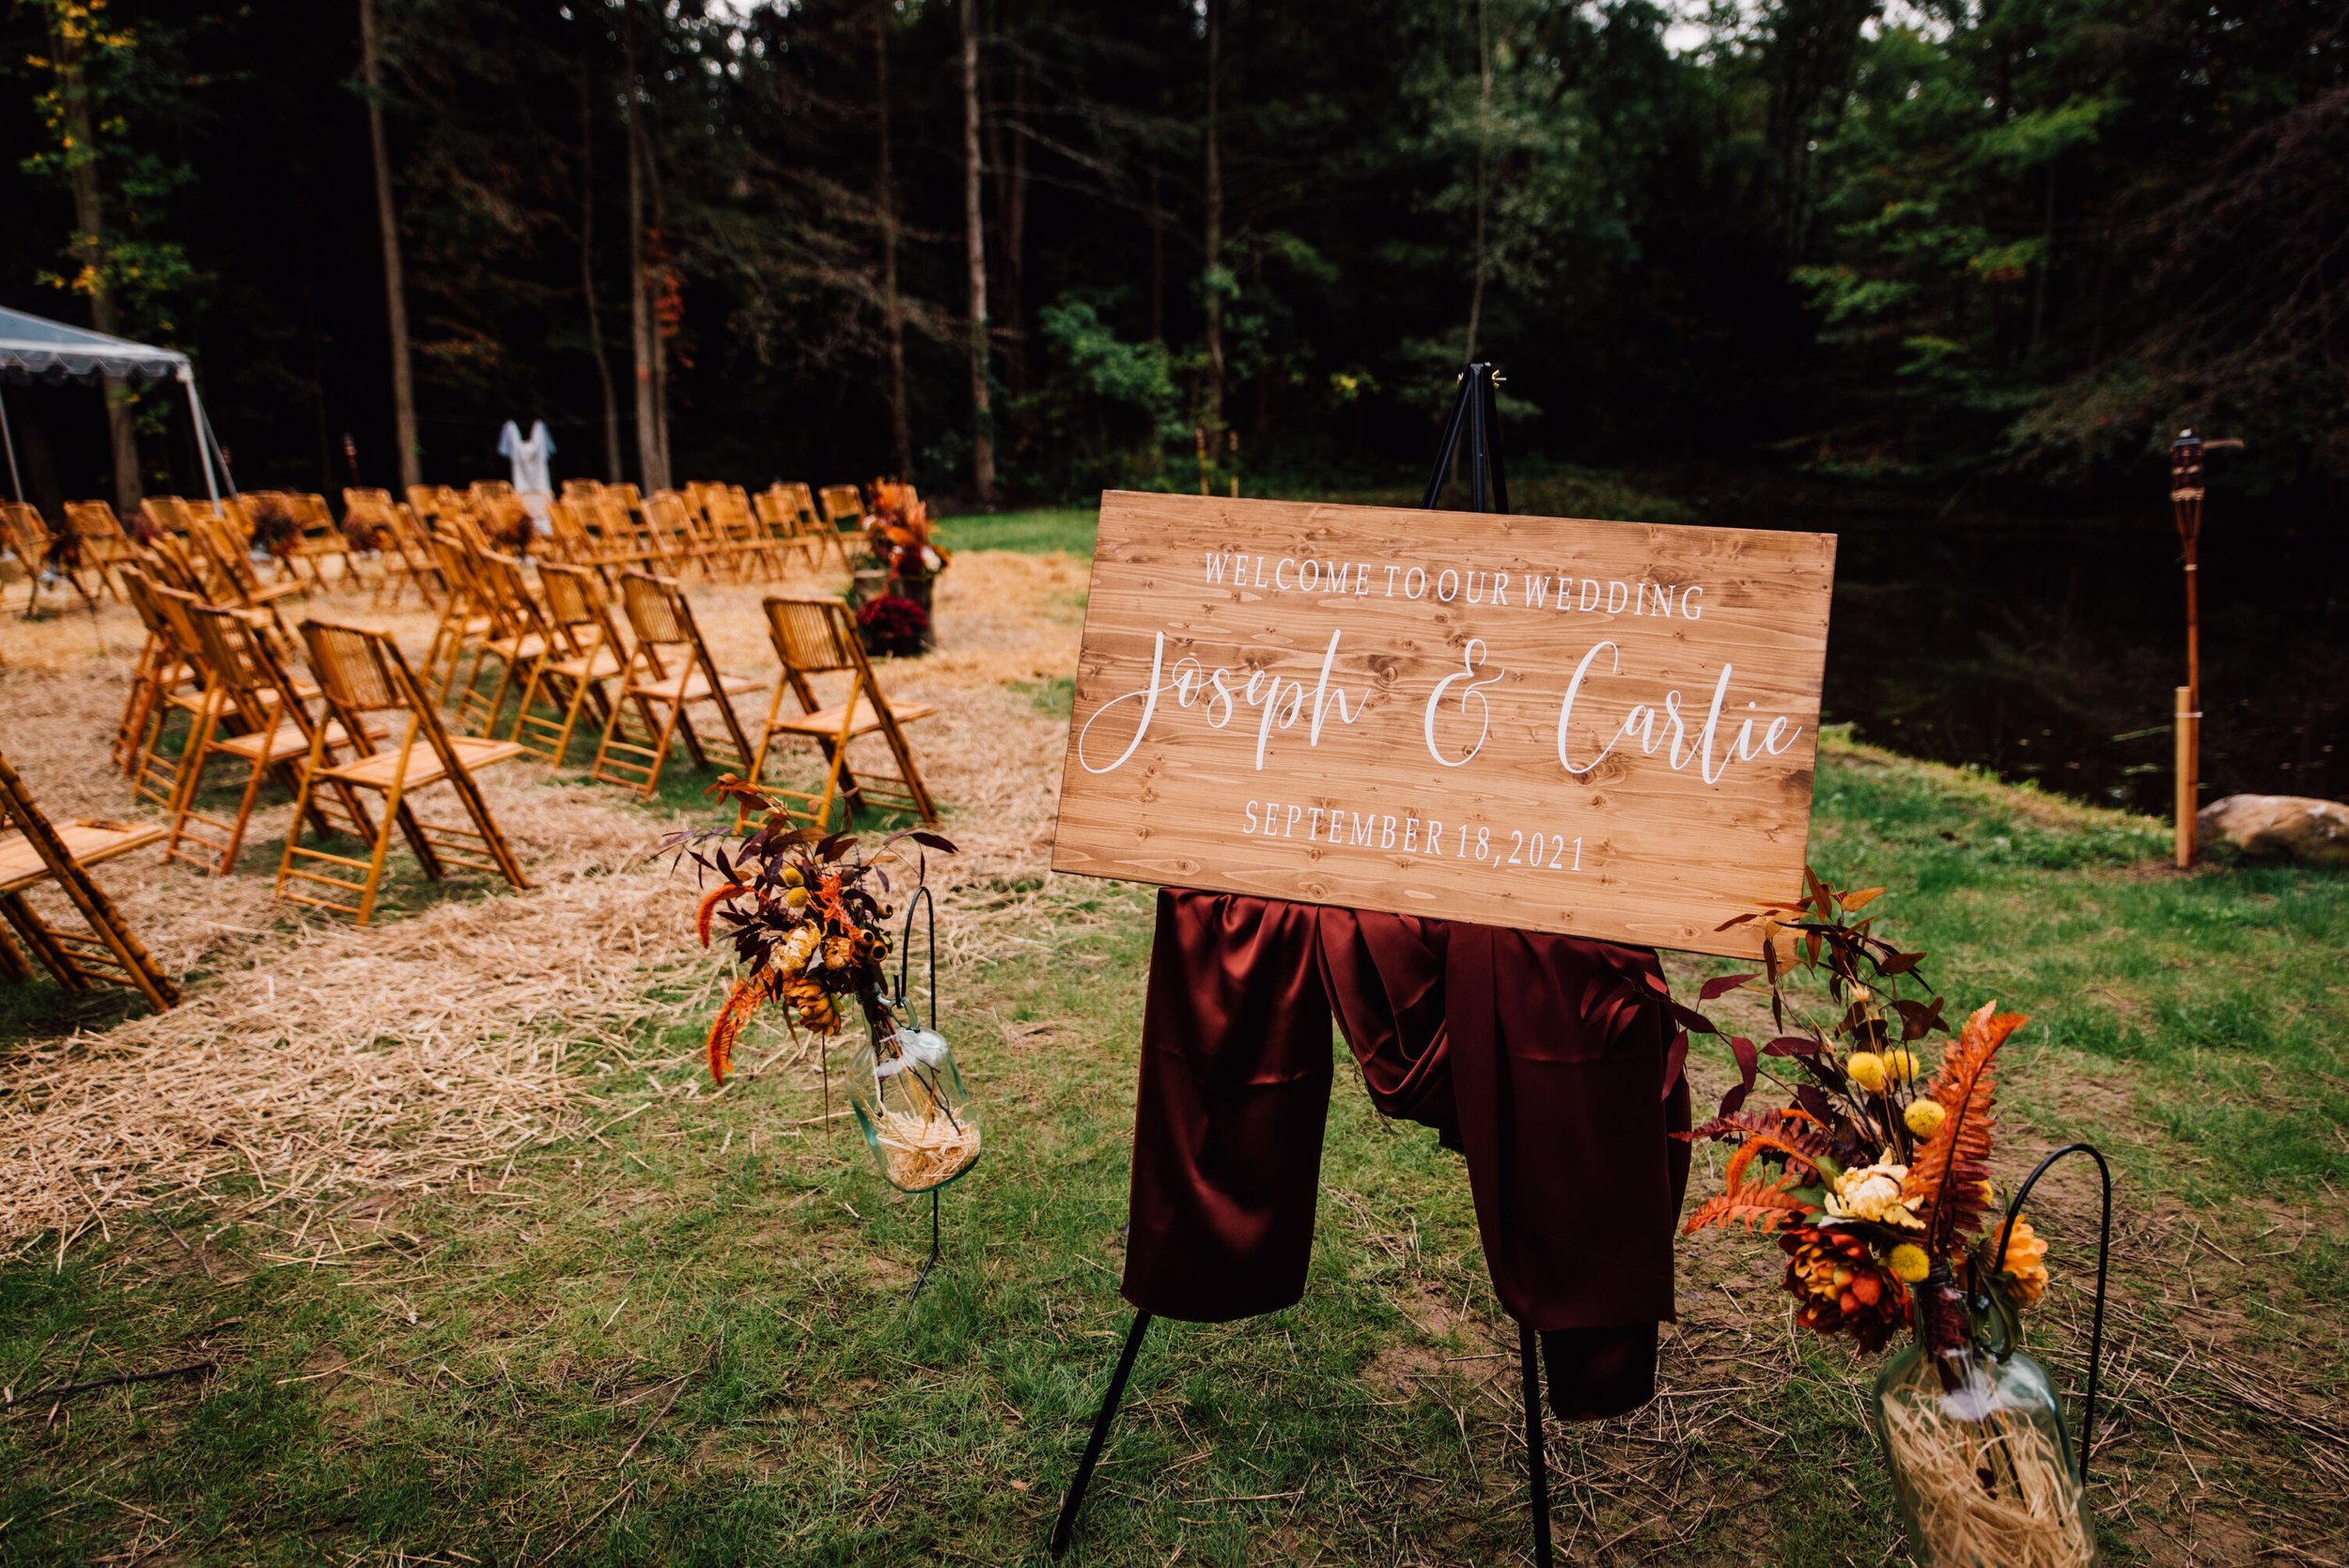  A rustic wedding sign welcomes guests to Joseph and Carlie’s outdoor wedding ceremony 